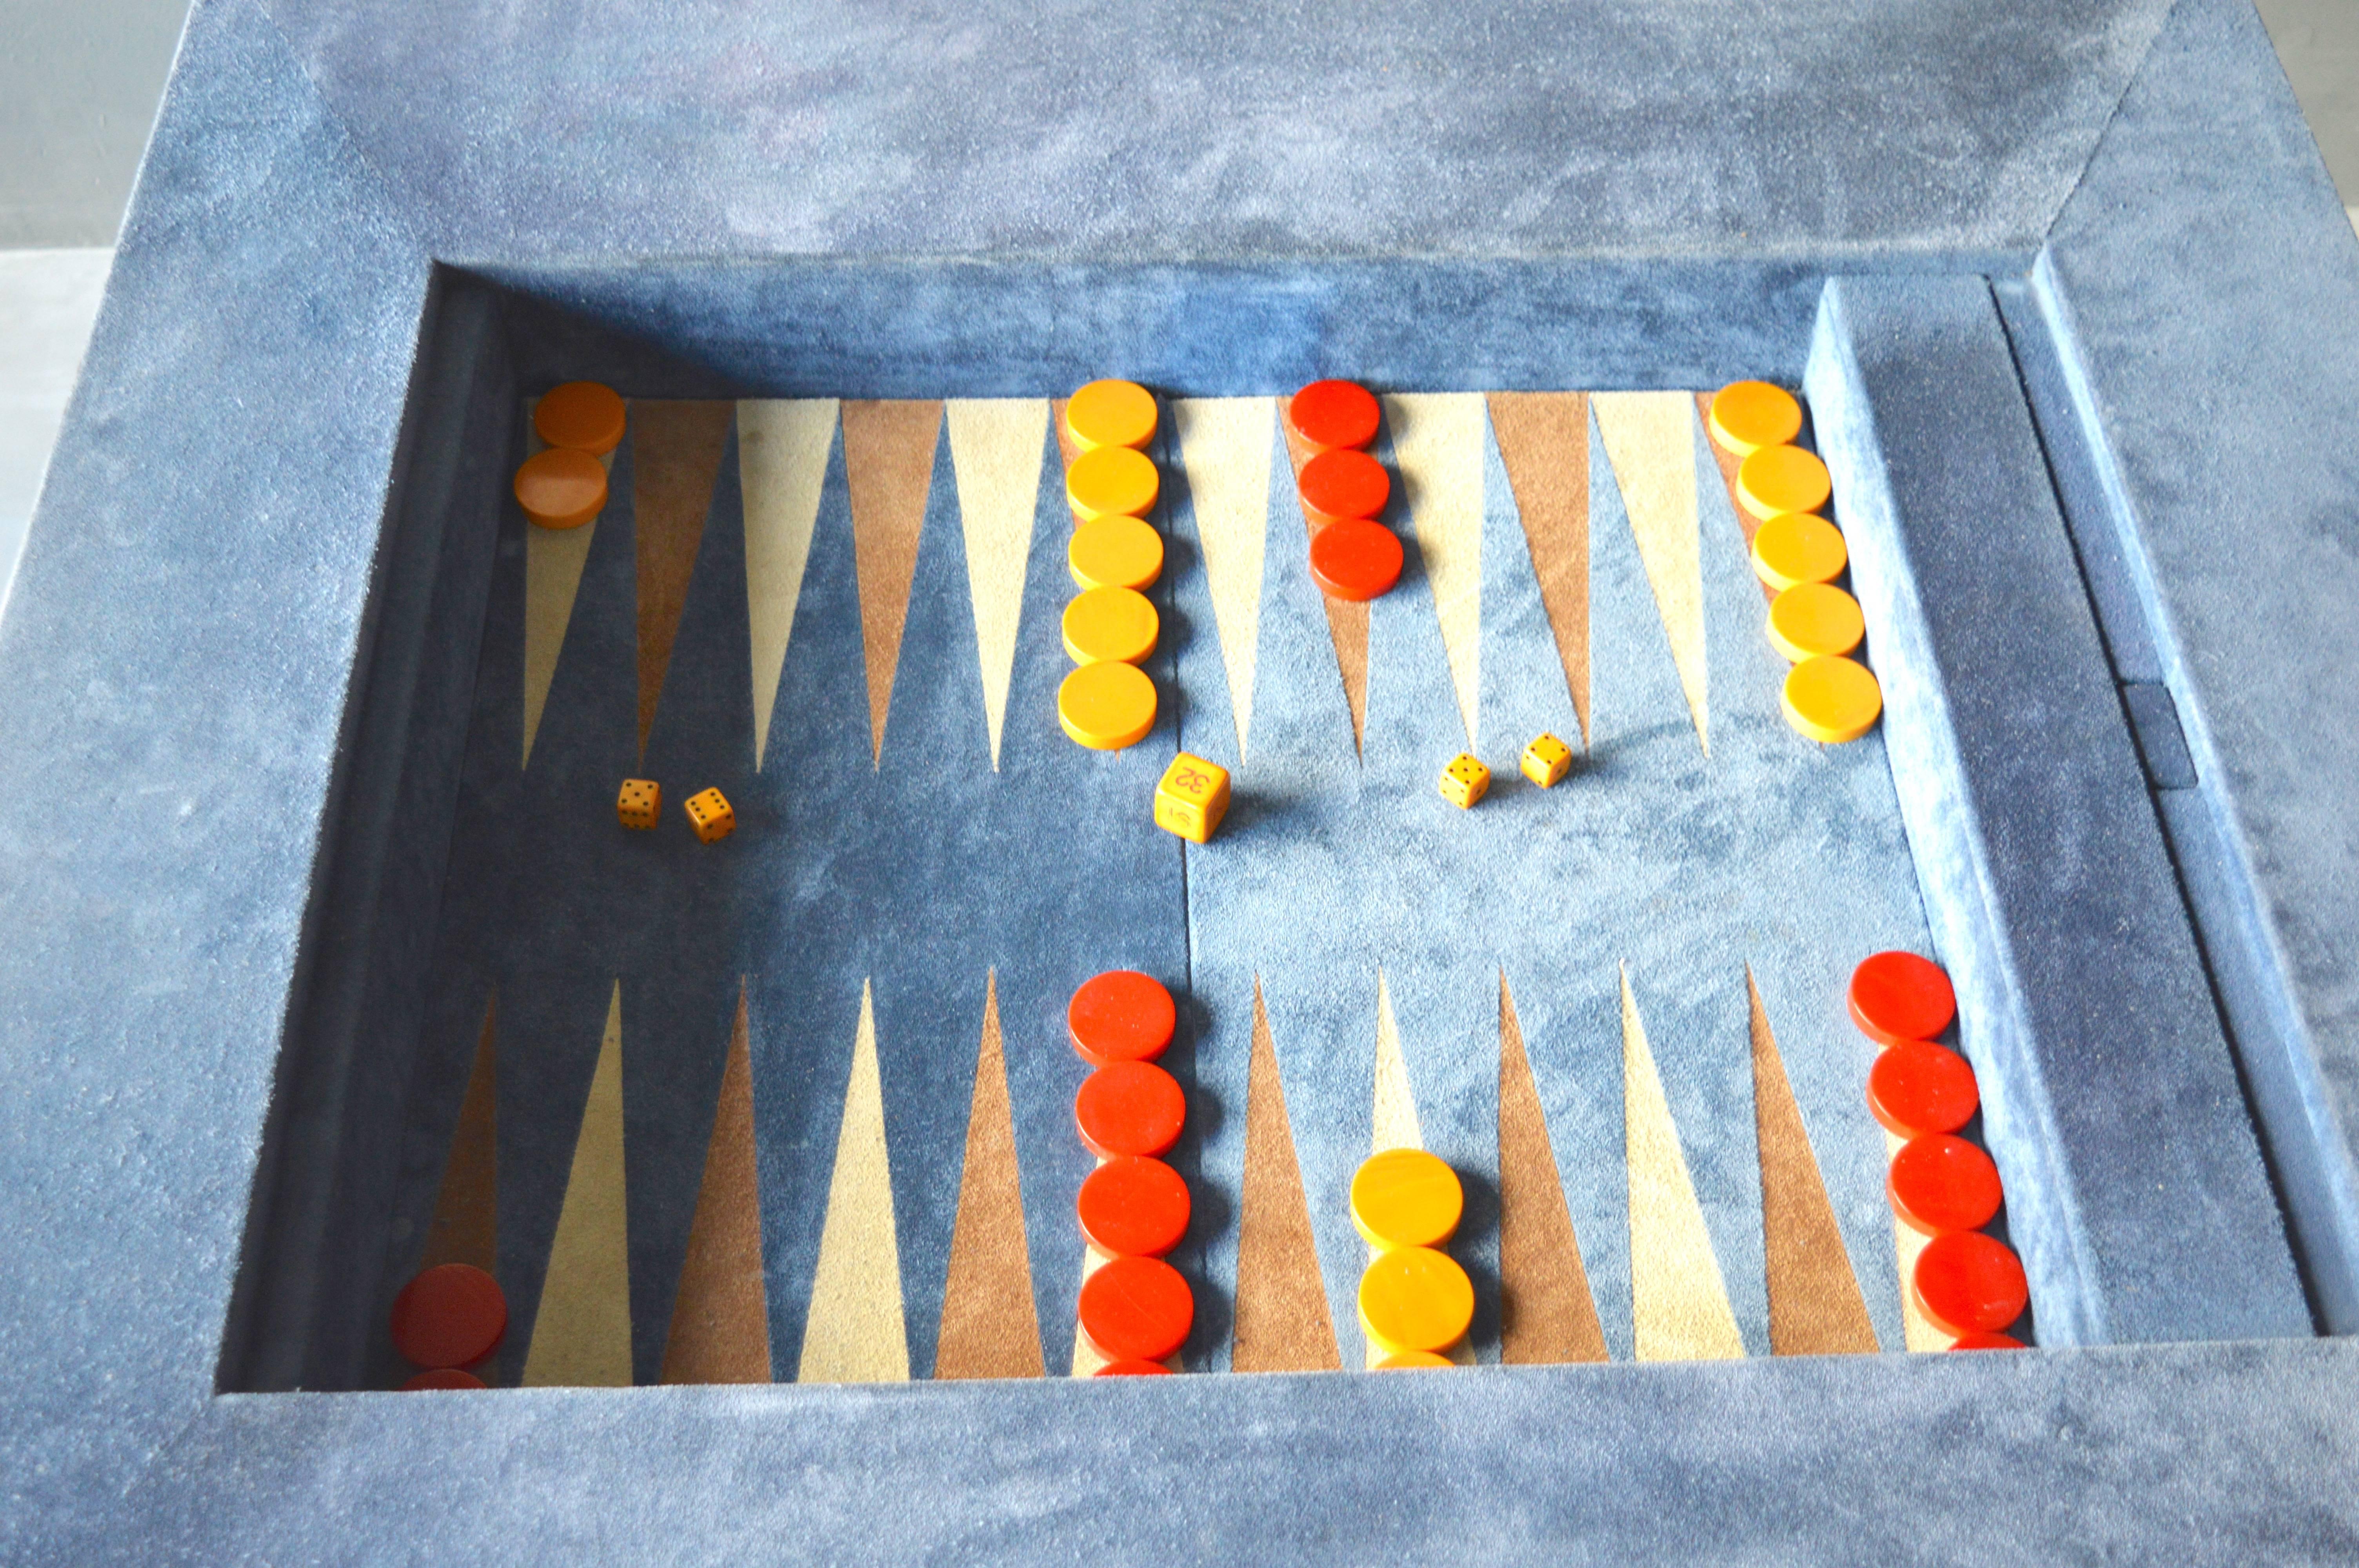 Great vintage backgammon table in a blueish or gray suede. Table comes with a complete set of red and mustard yellow bakelite backgammon pips, two sets of bone dice and bone doubling cube. Inset compartment for storing game pieces. Removable